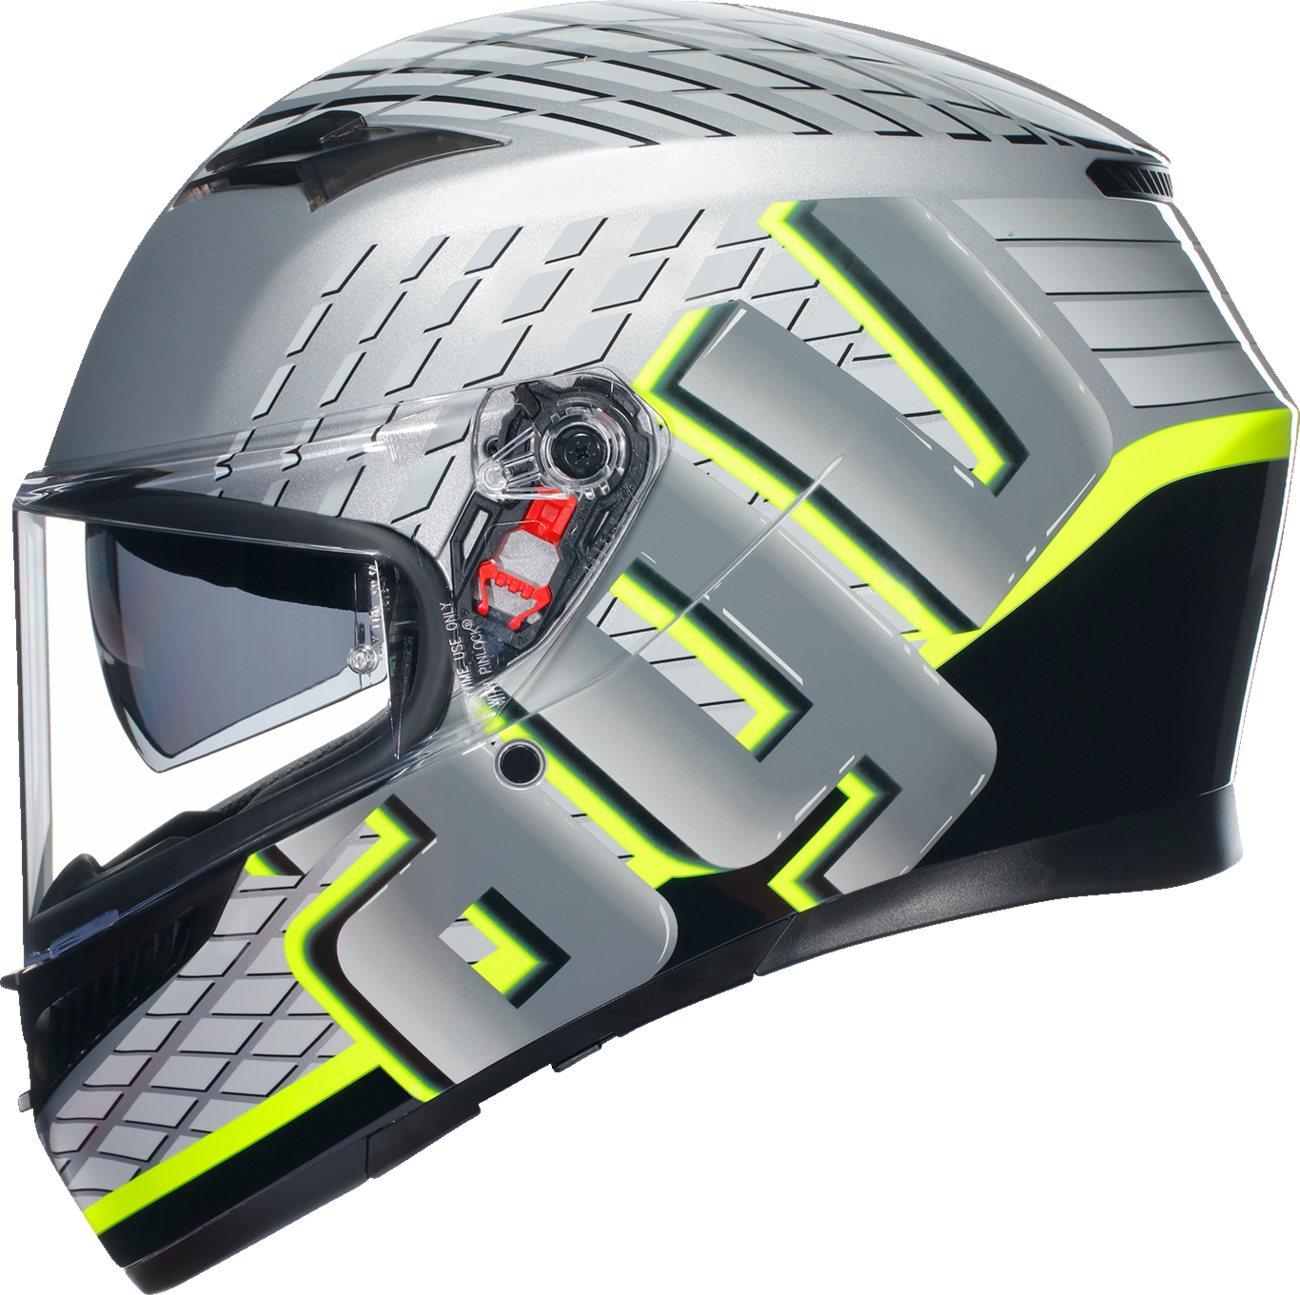 AGV K3 Helmet - Fortify - Gray/Black/Yellow Fluo - Small 2118381004011S